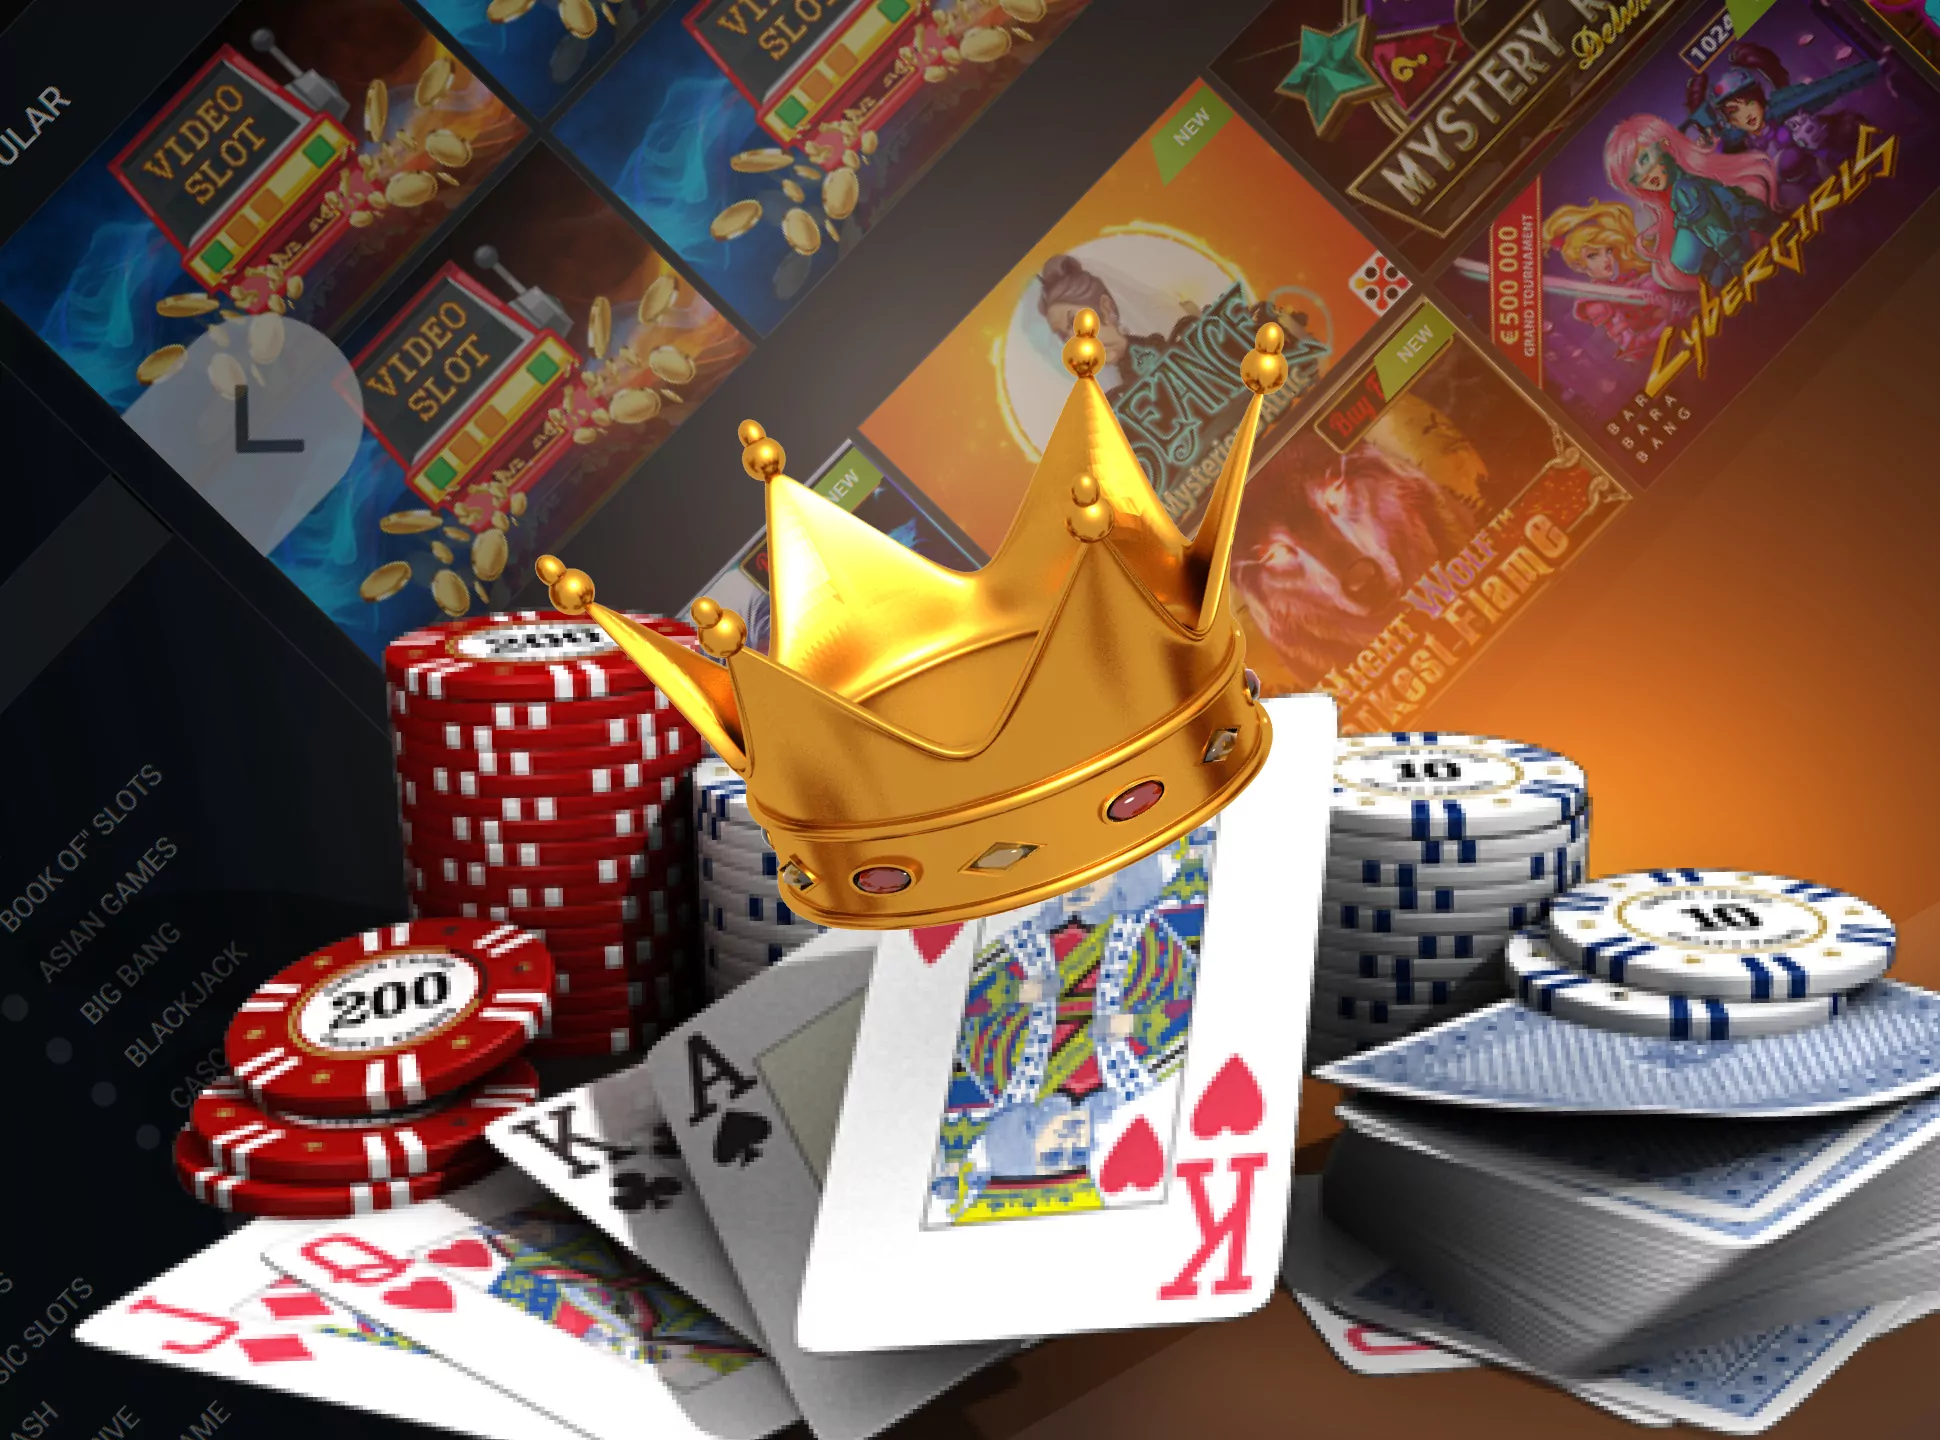 Play baccarat on real money at online casino.